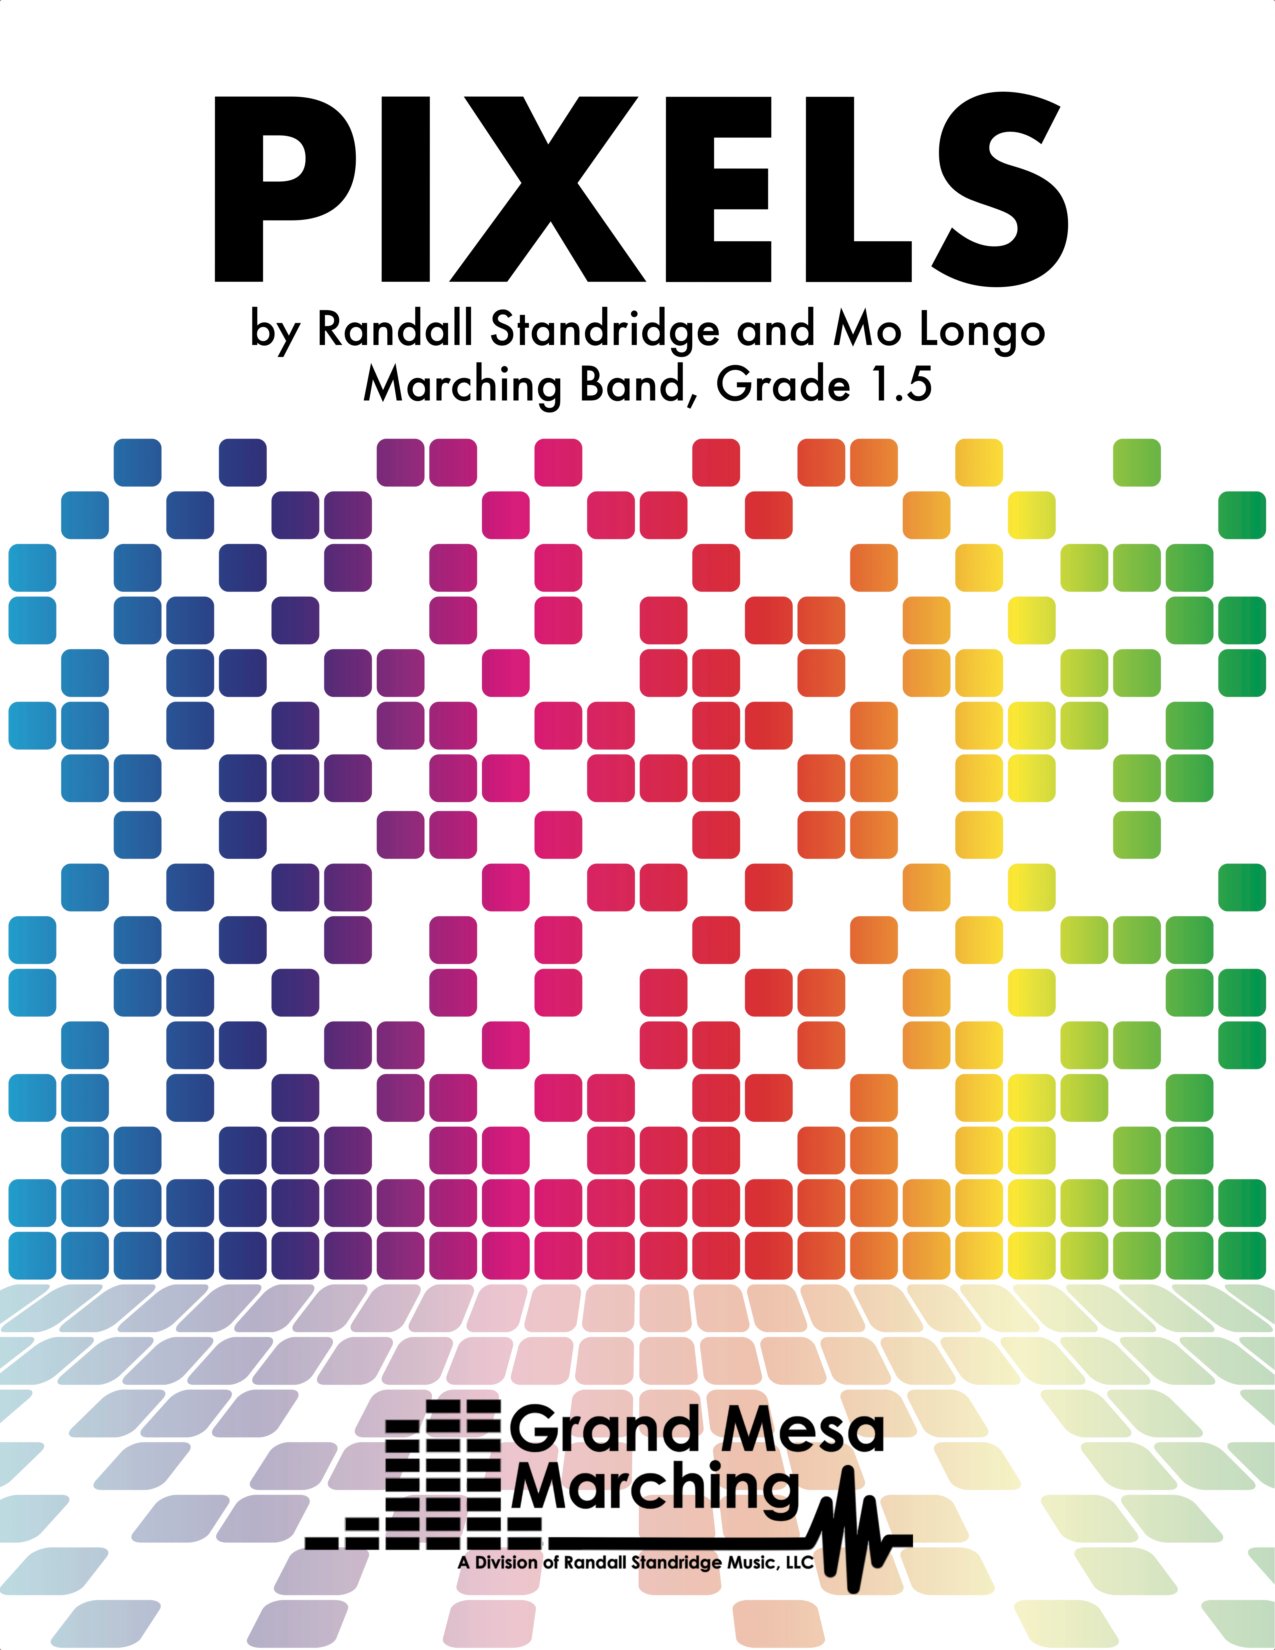 Pixels marching band show cover